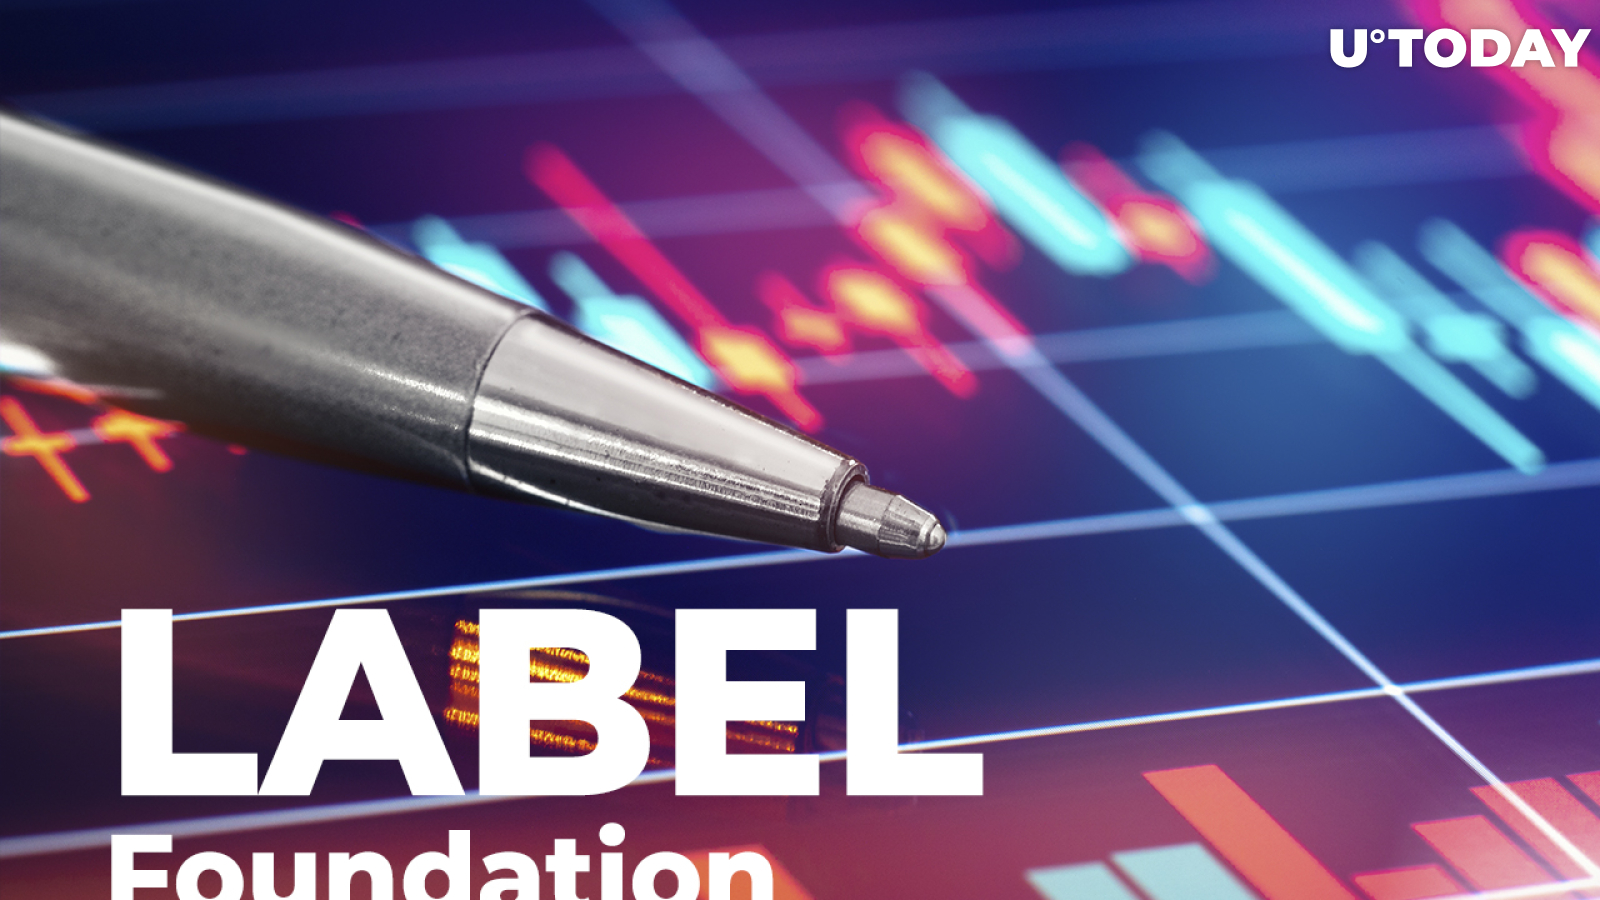 LABEL Foundation Raised $2 Million Through Strategic Investment From eBest Investments and Groom Investments